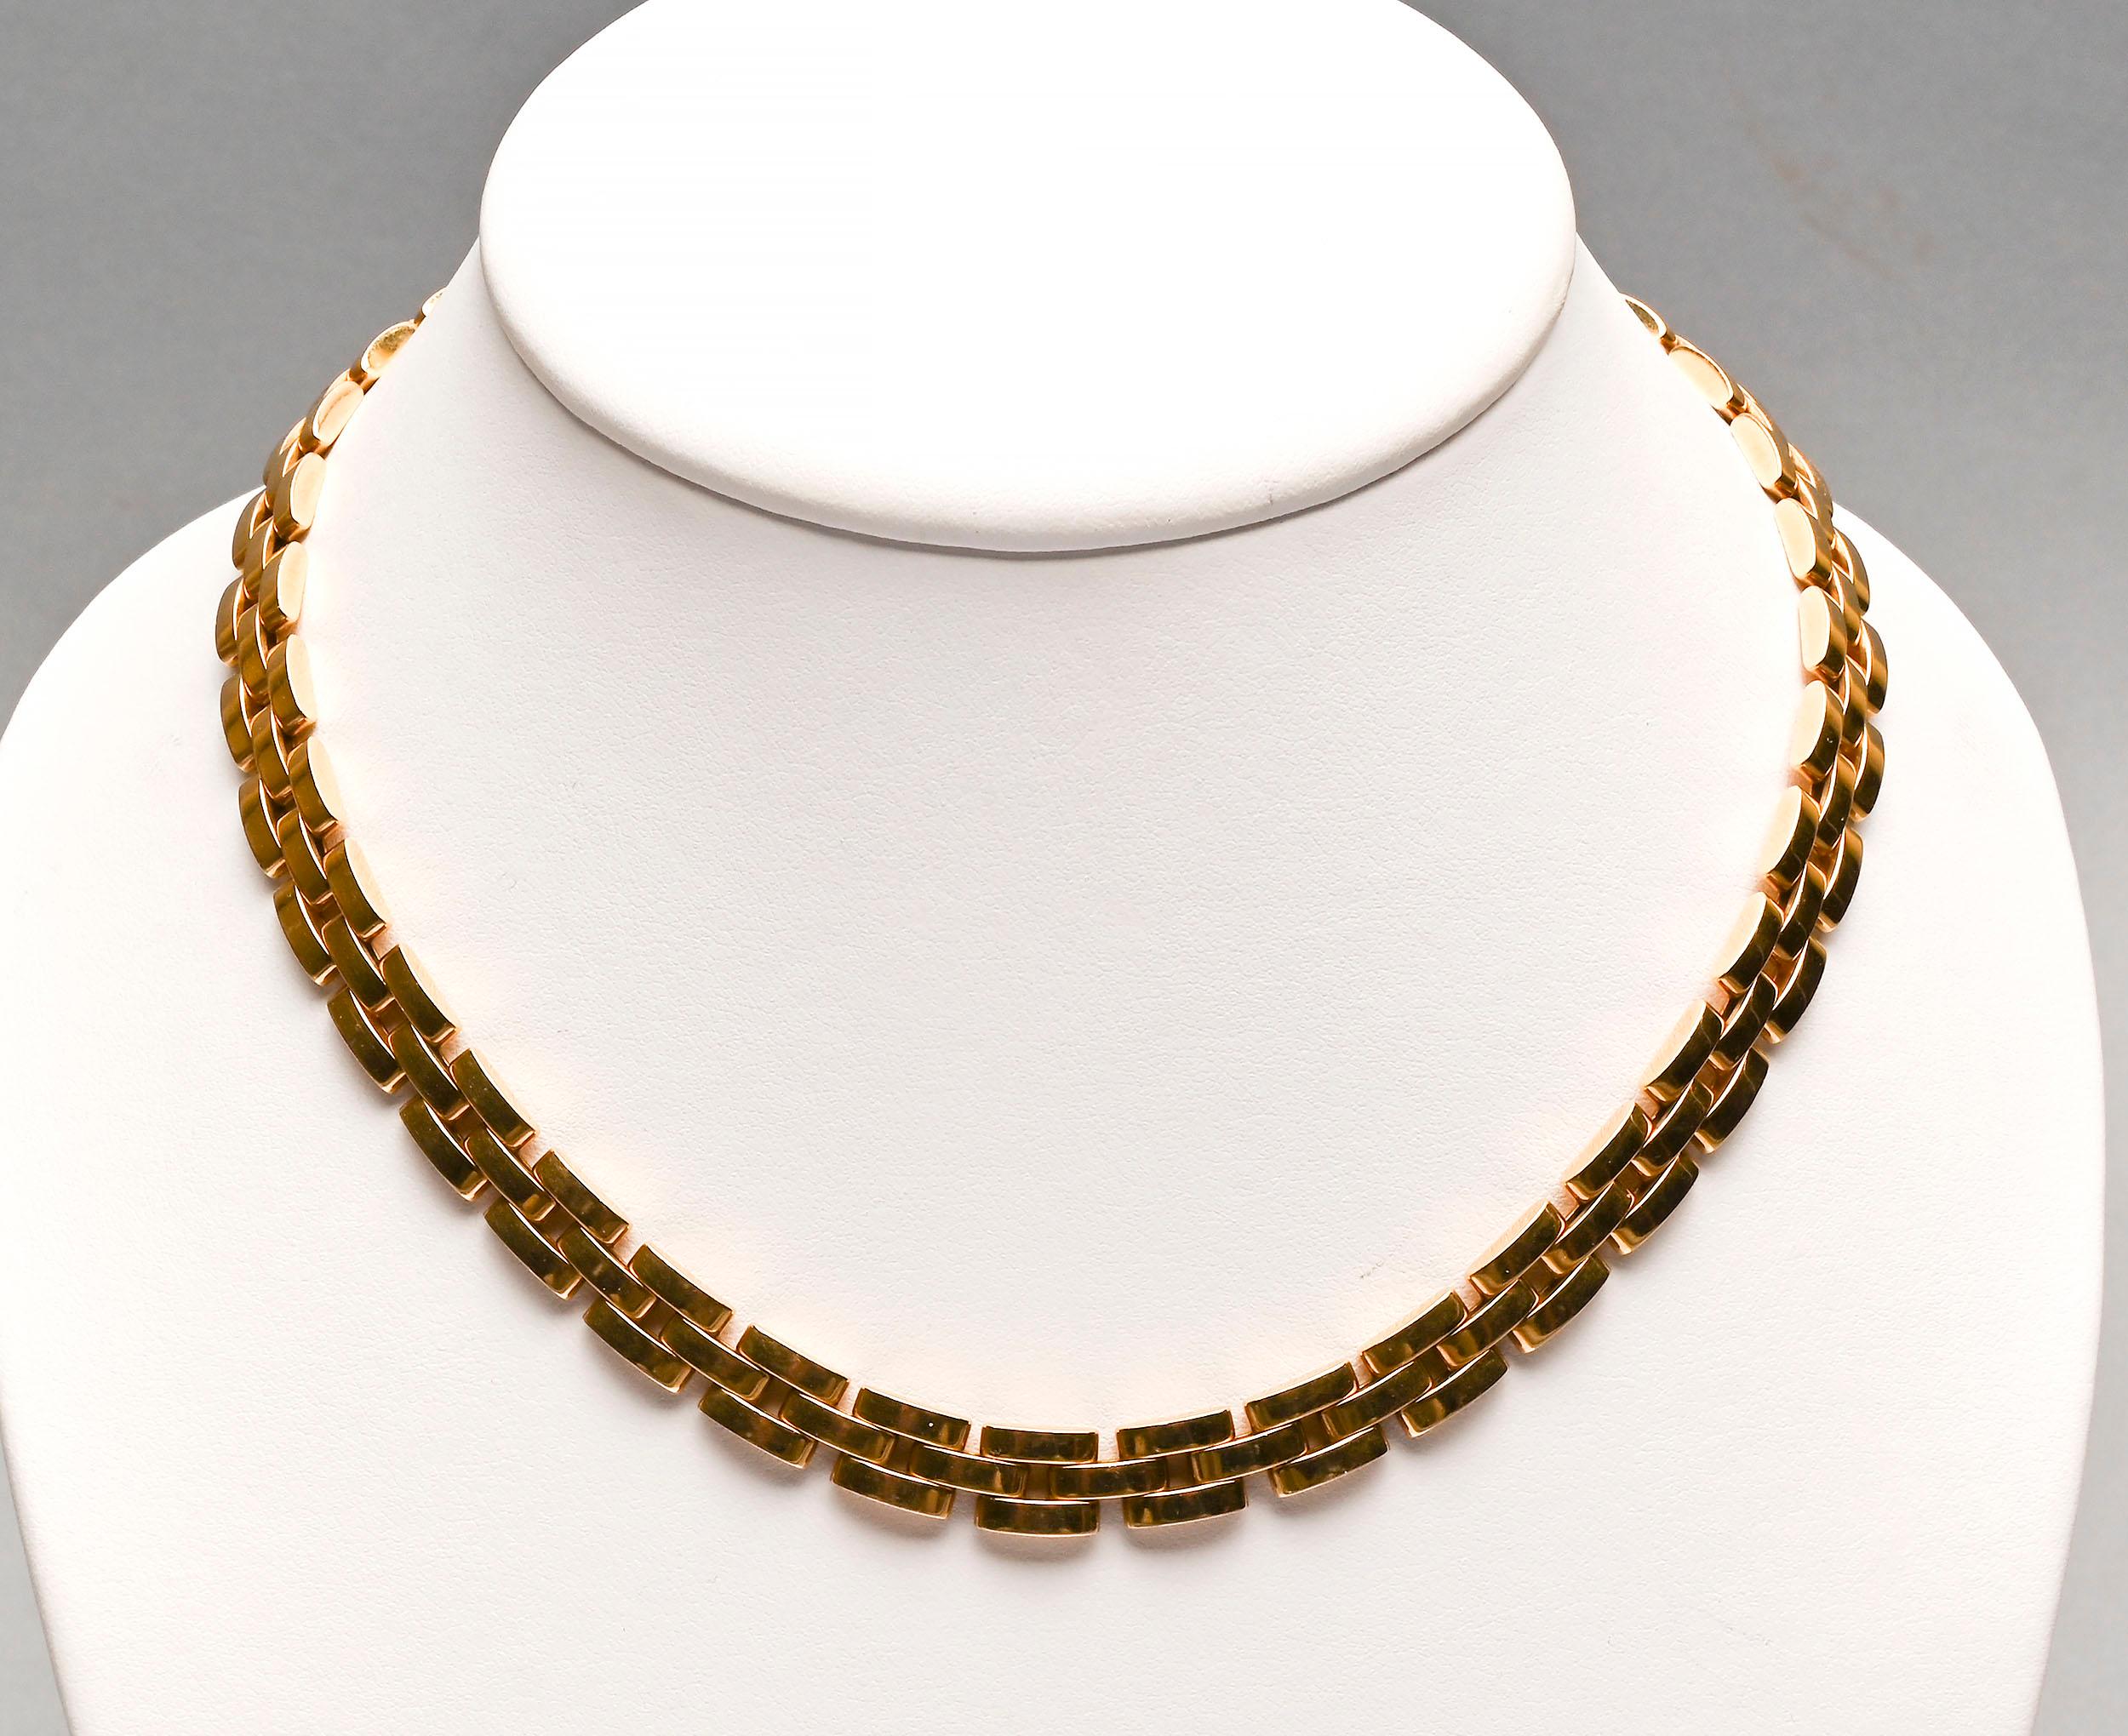 This triple row Maillon Panthere necklace by Cartier is one of their most timeless designs. It measures 16 1/2 inches in length and  5/16